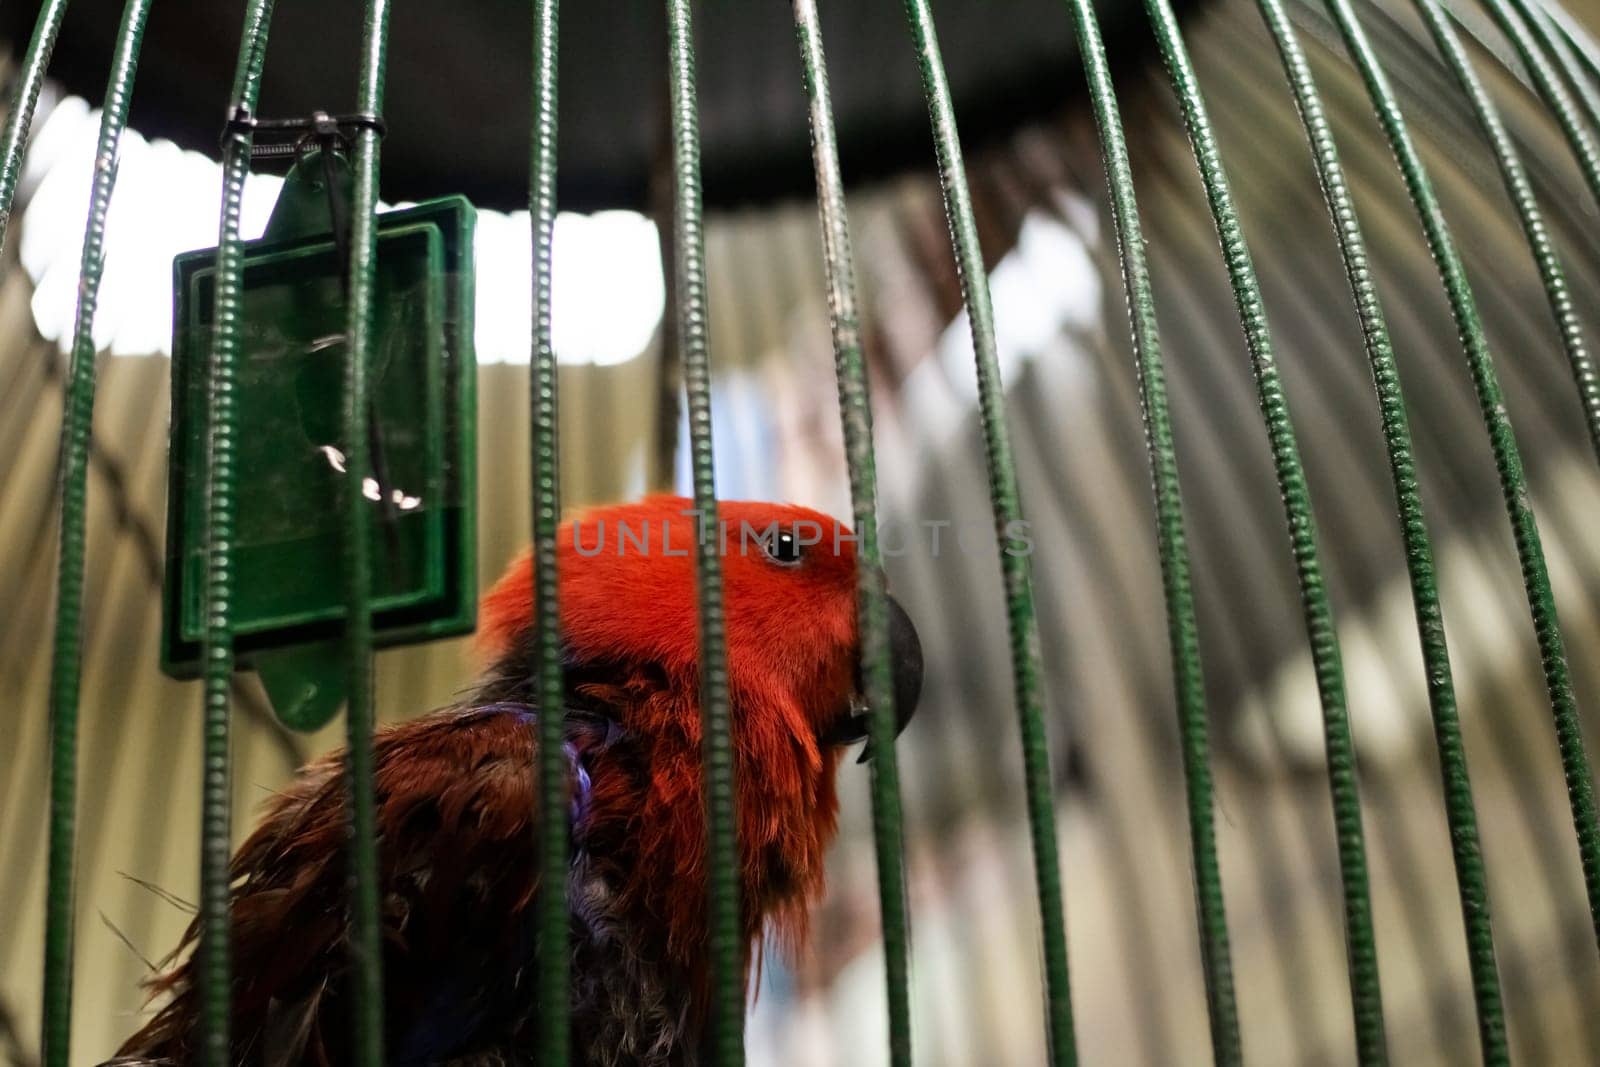 Red parrot behind bars cage close up with copy space